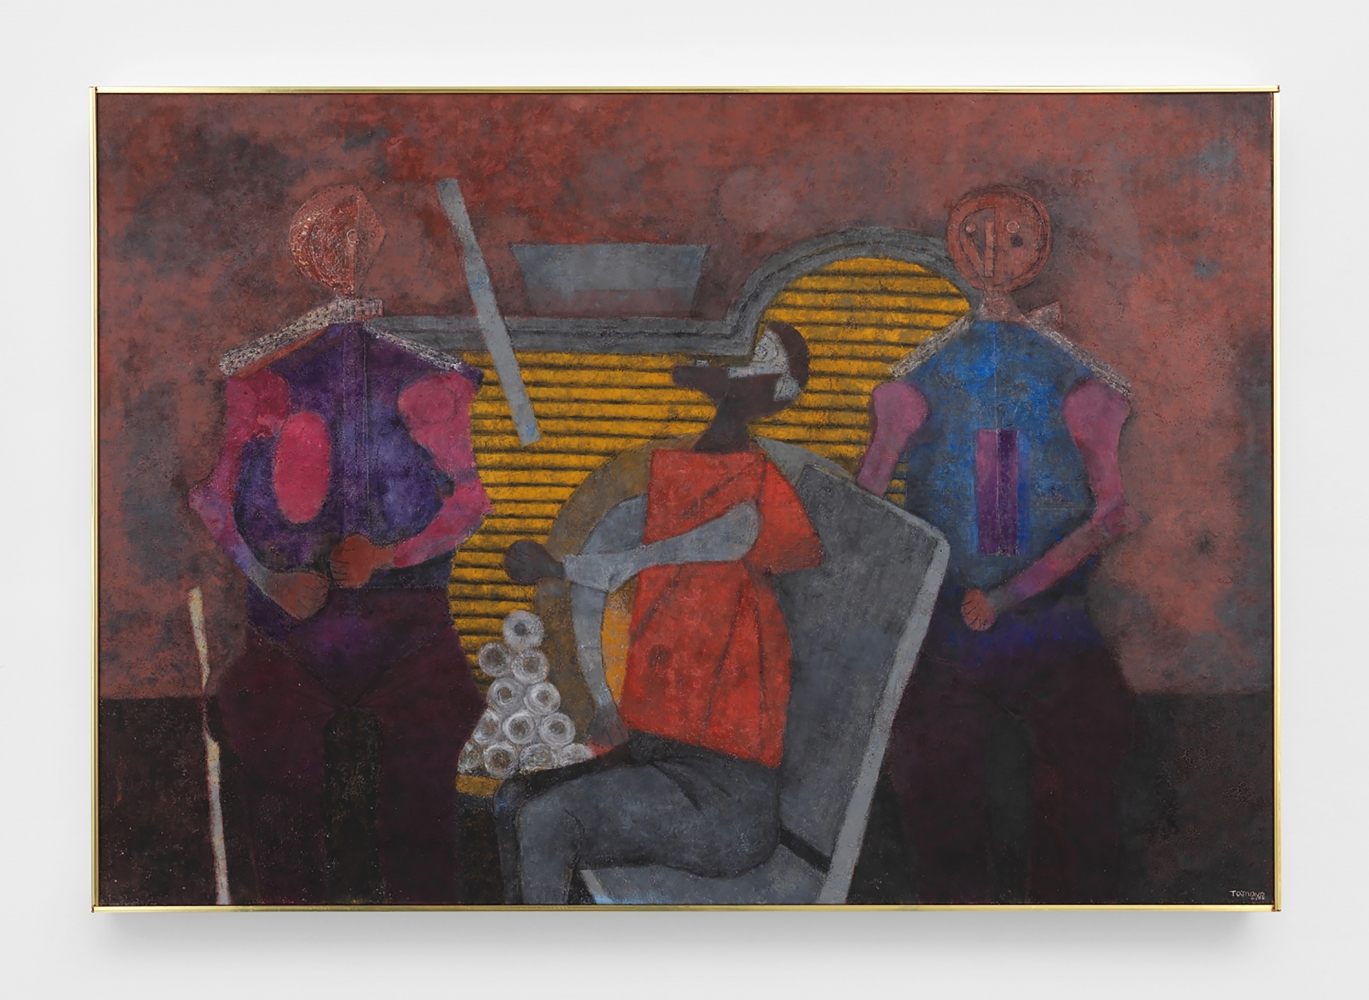 Rufino Tamayo
Tres personajes, 1985

oil on canvas

49 1/4 x 71 in. / 125.1 x 180.3 cm